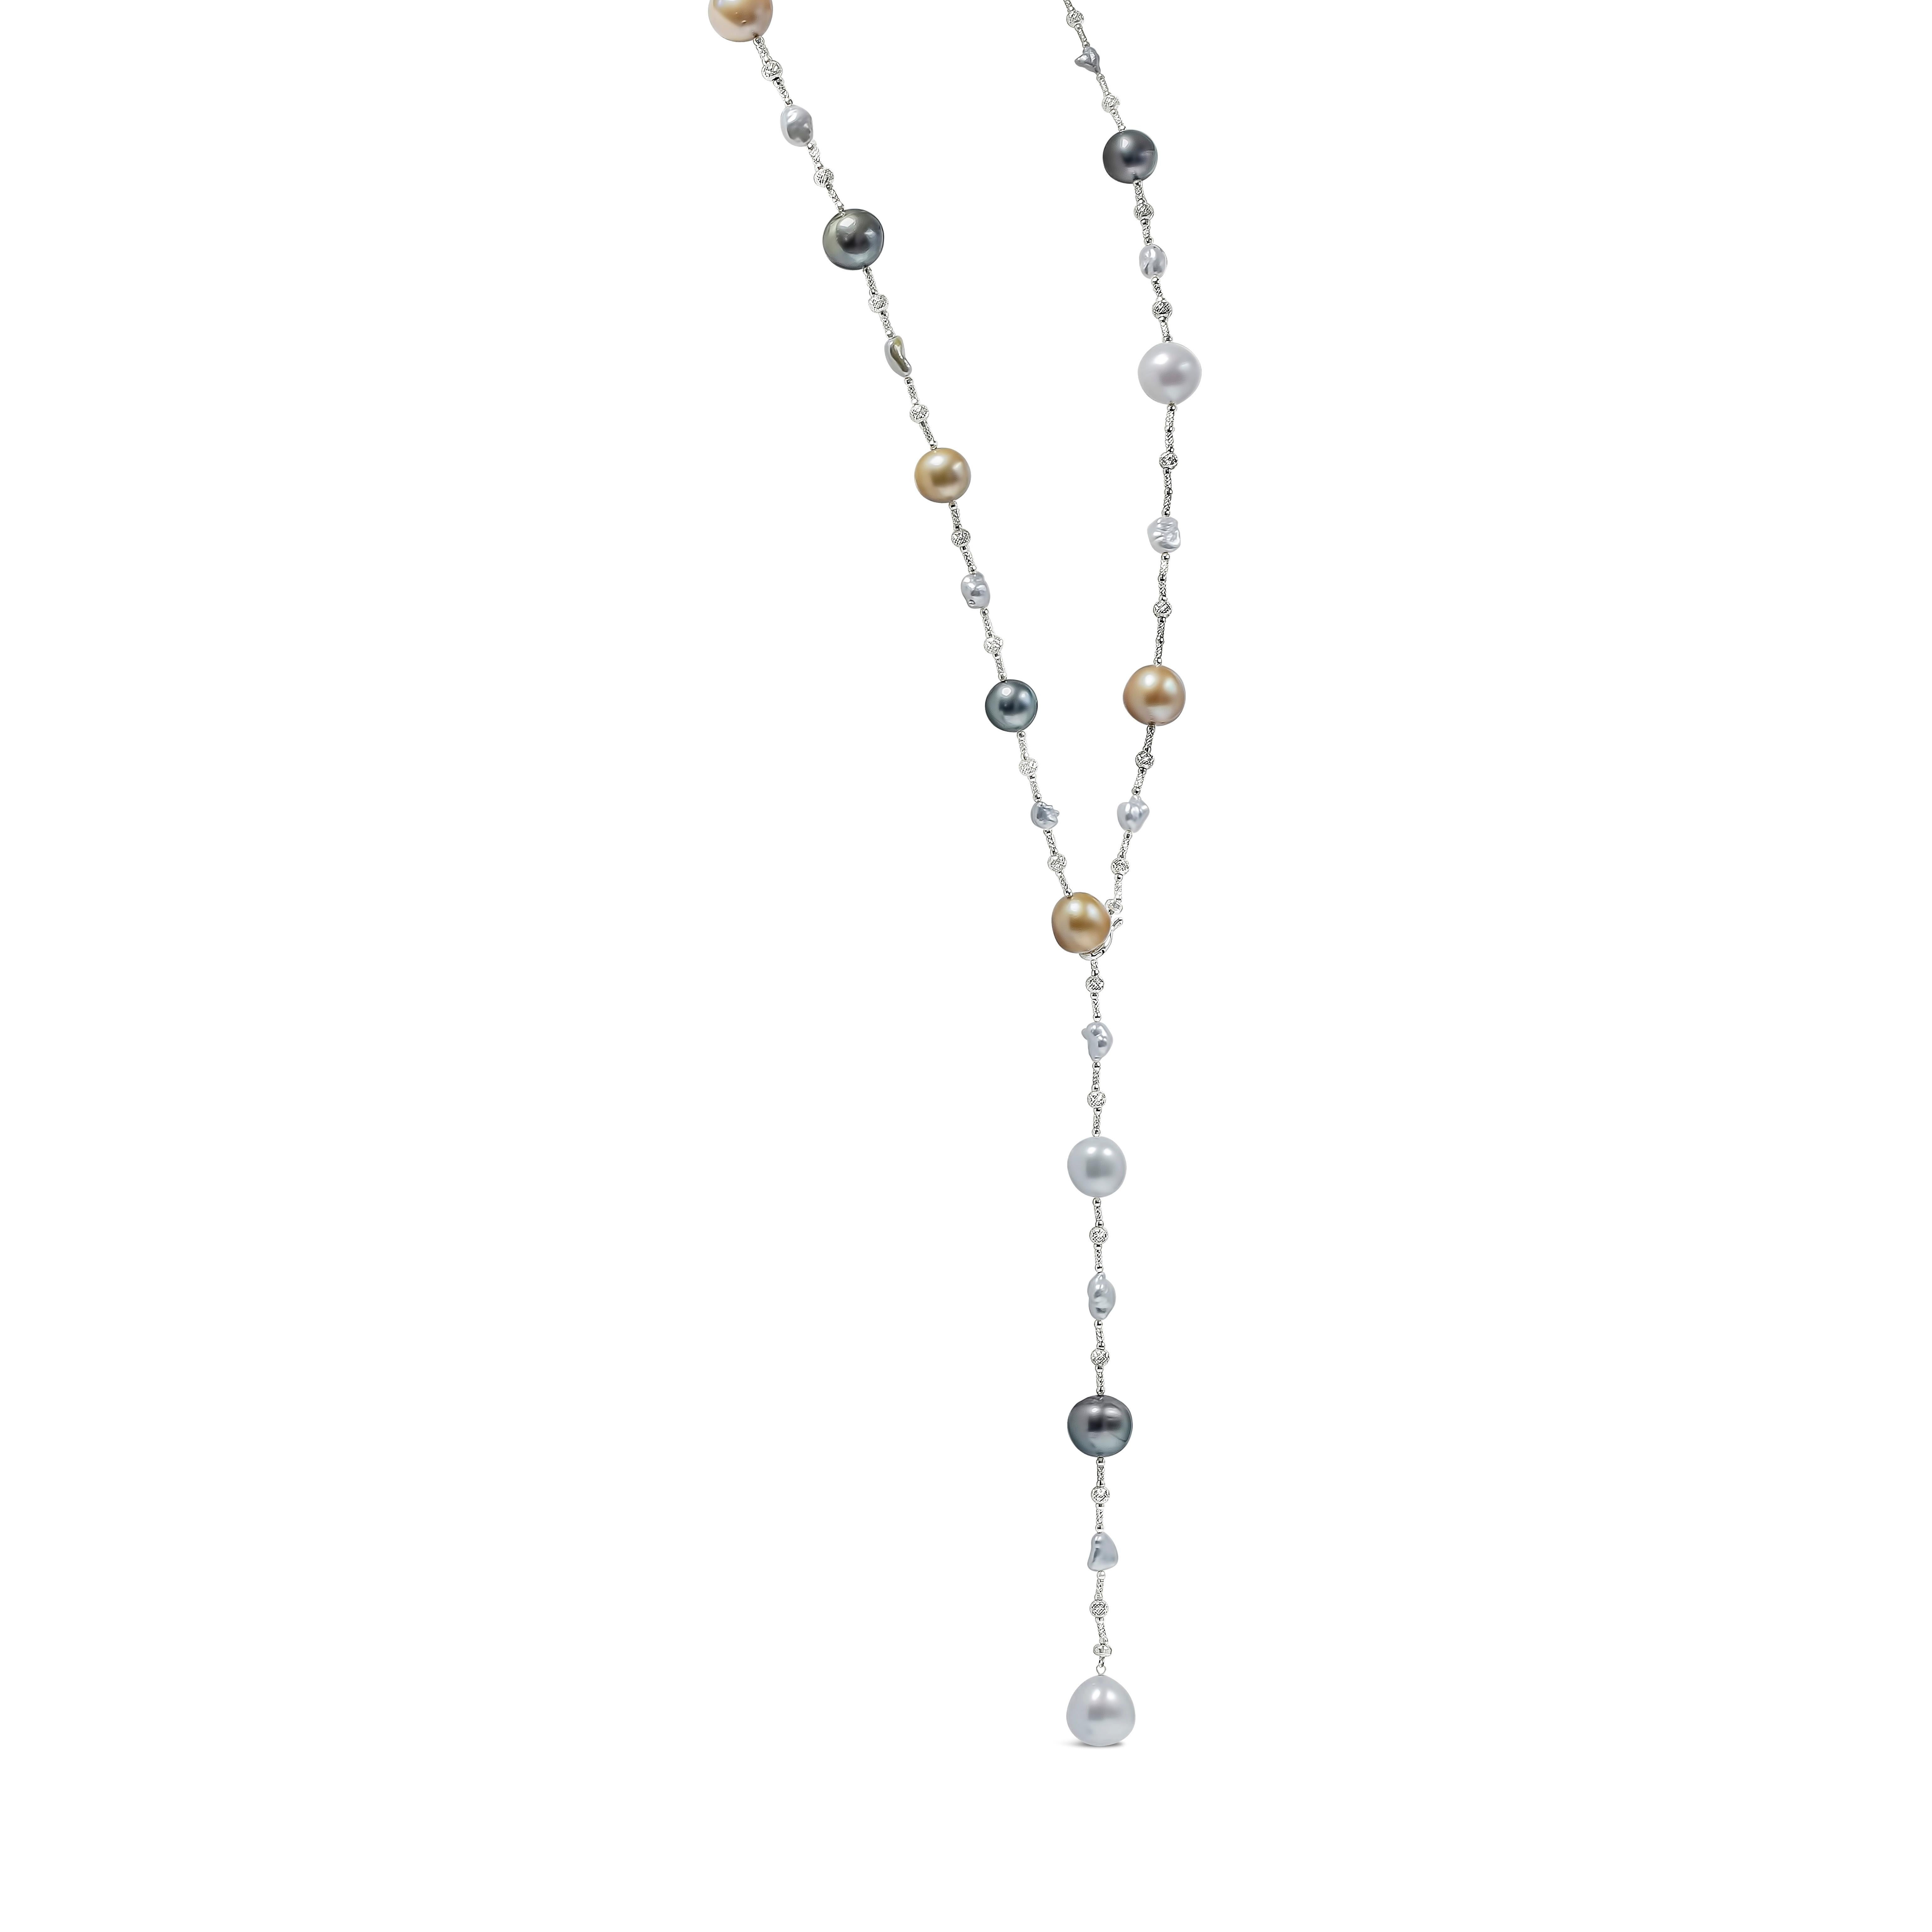 A very versatile necklace showcasing 11-14mm, 30 pieces of multi-color South Sea, Tahitian, and Keshi Pearls. Evenly spaced by 18k white gold knots. 32 inches in length and length of this necklace can be customizable. Finely made in 18K white